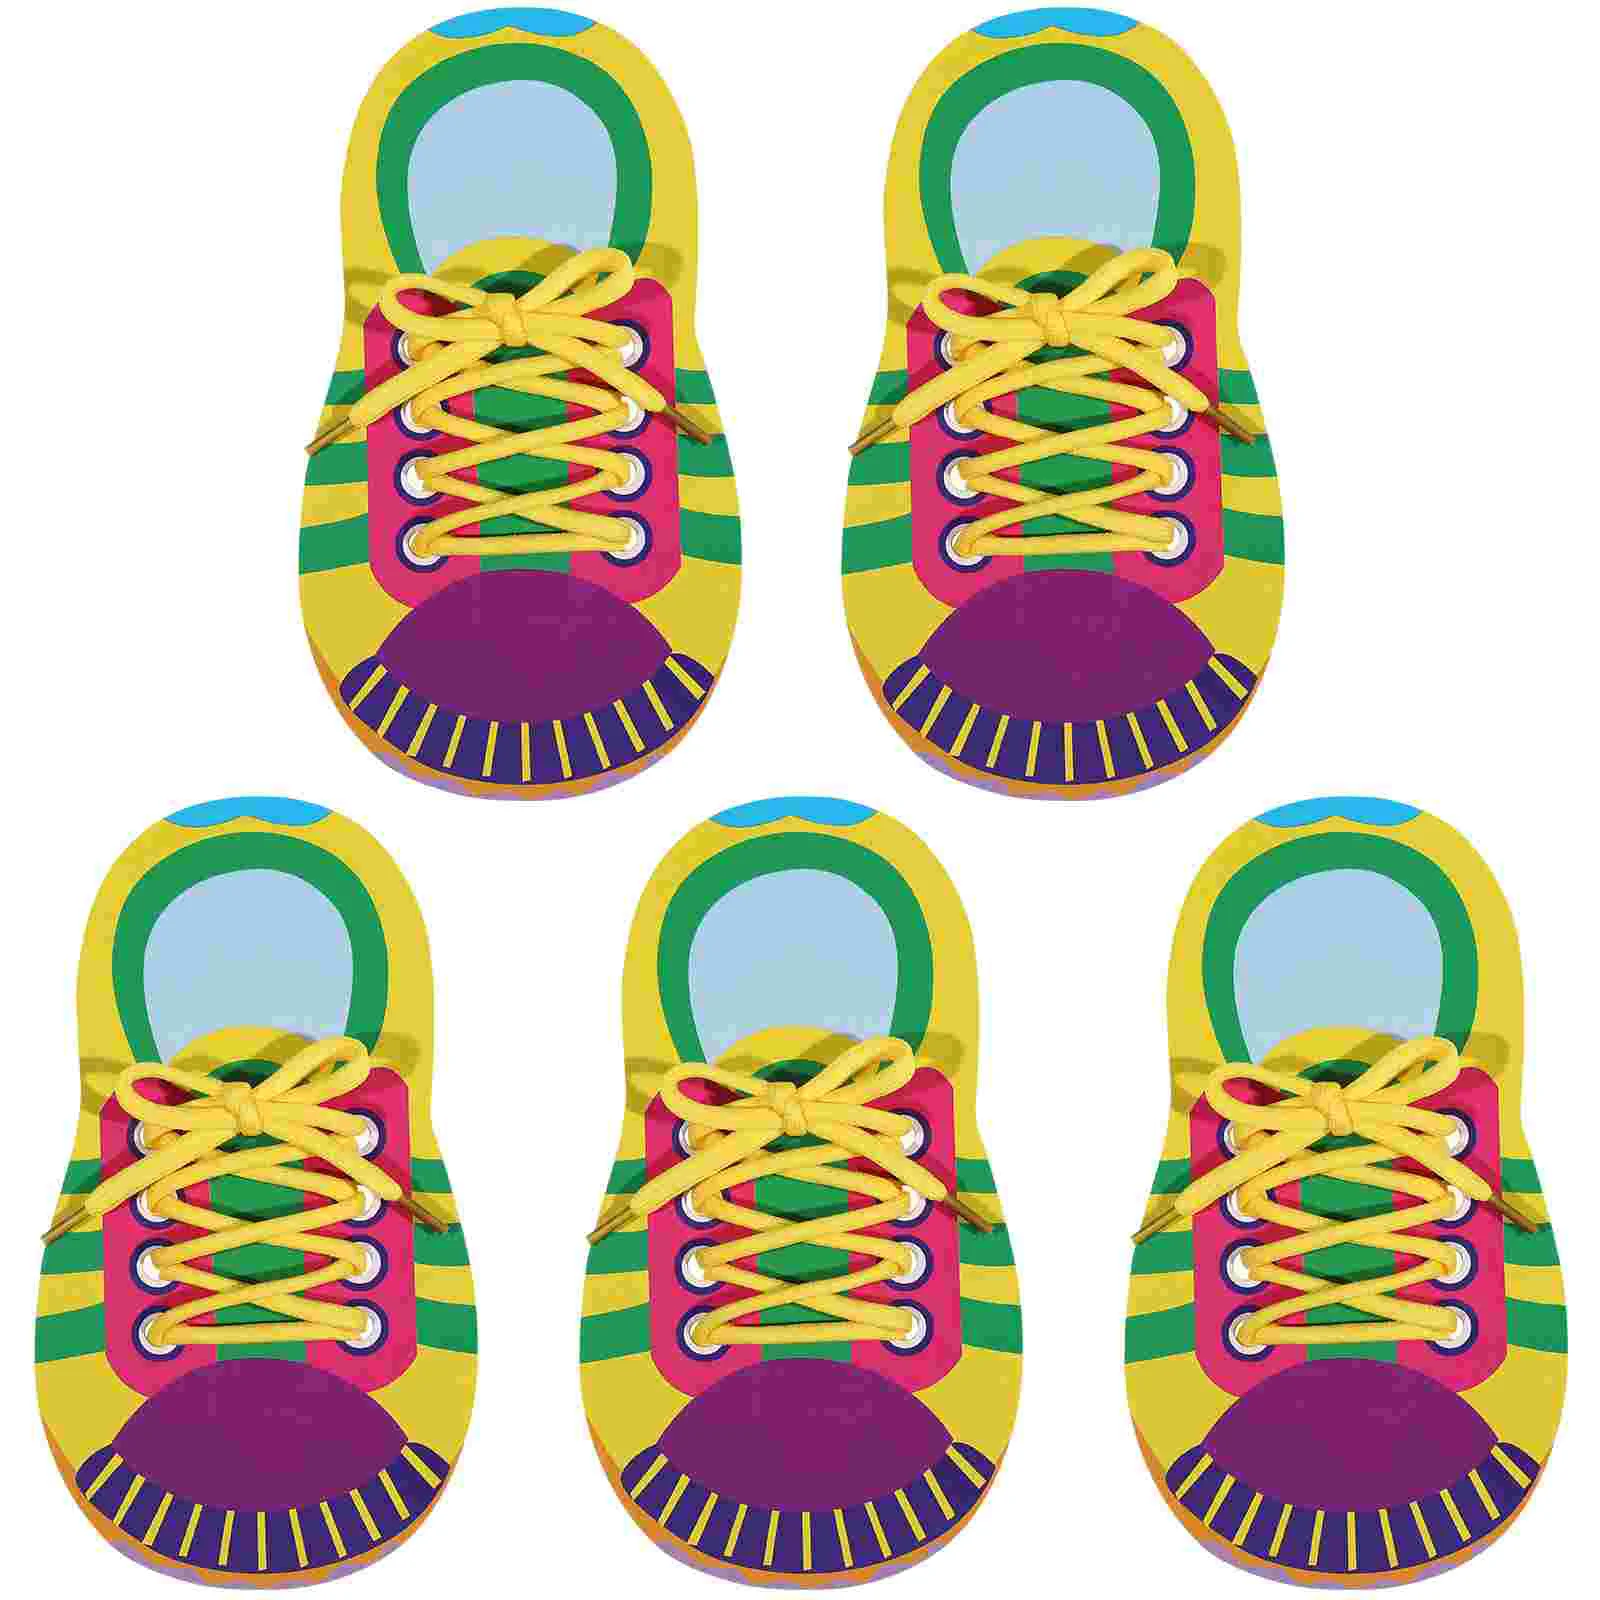 

5 Sets Shoelace Toy Kids Teaching Aids Puzzle Children Toys Educational Learning Lacing for Tie Shoelaces